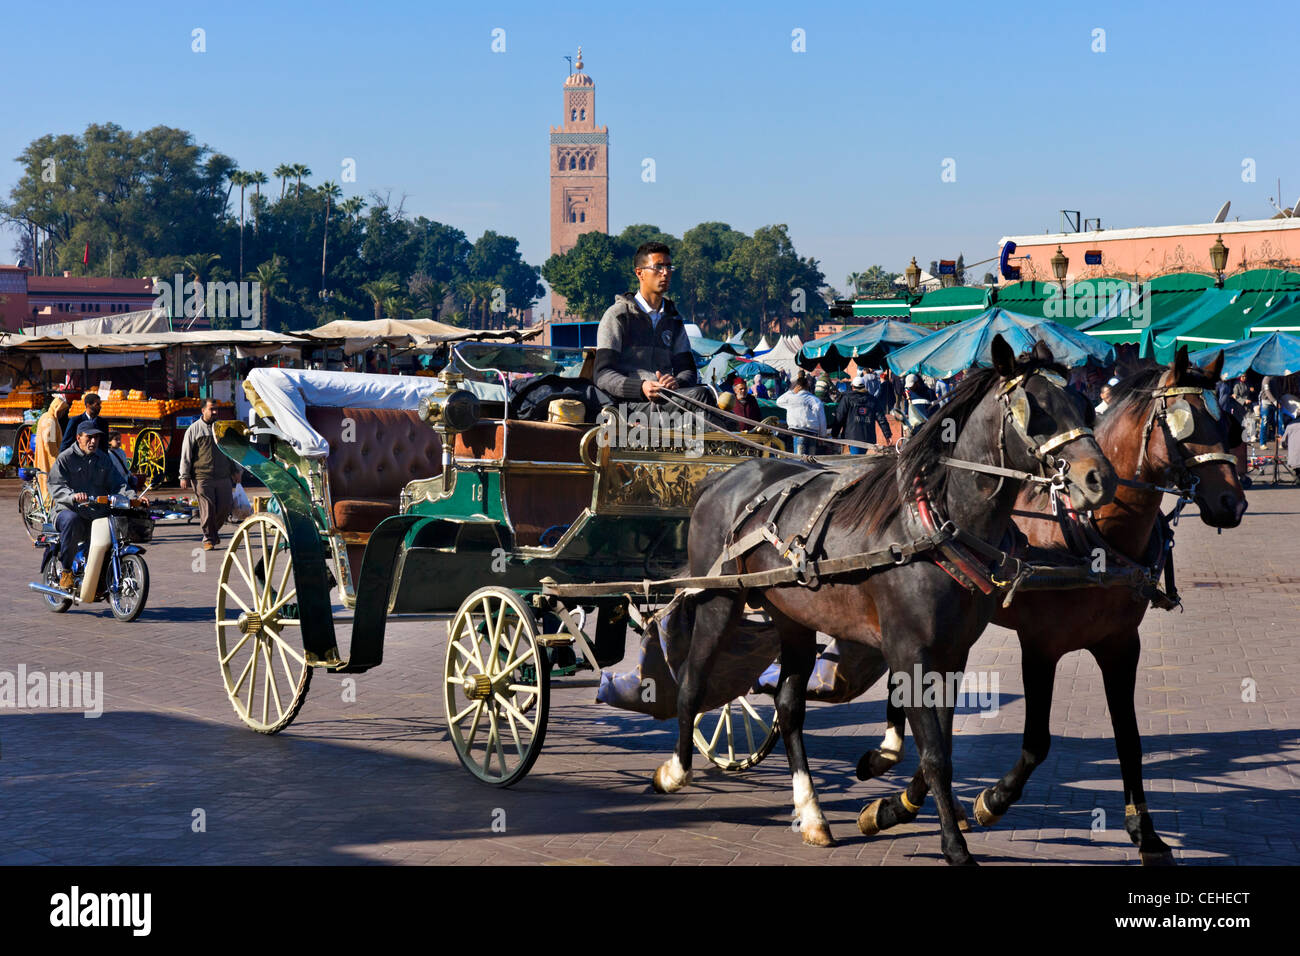 Caleche in Djemaa el Fna sqare with the minaret of the Koutoubia Mosque behind, Marrakech, Morocco, North Africa Stock Photo